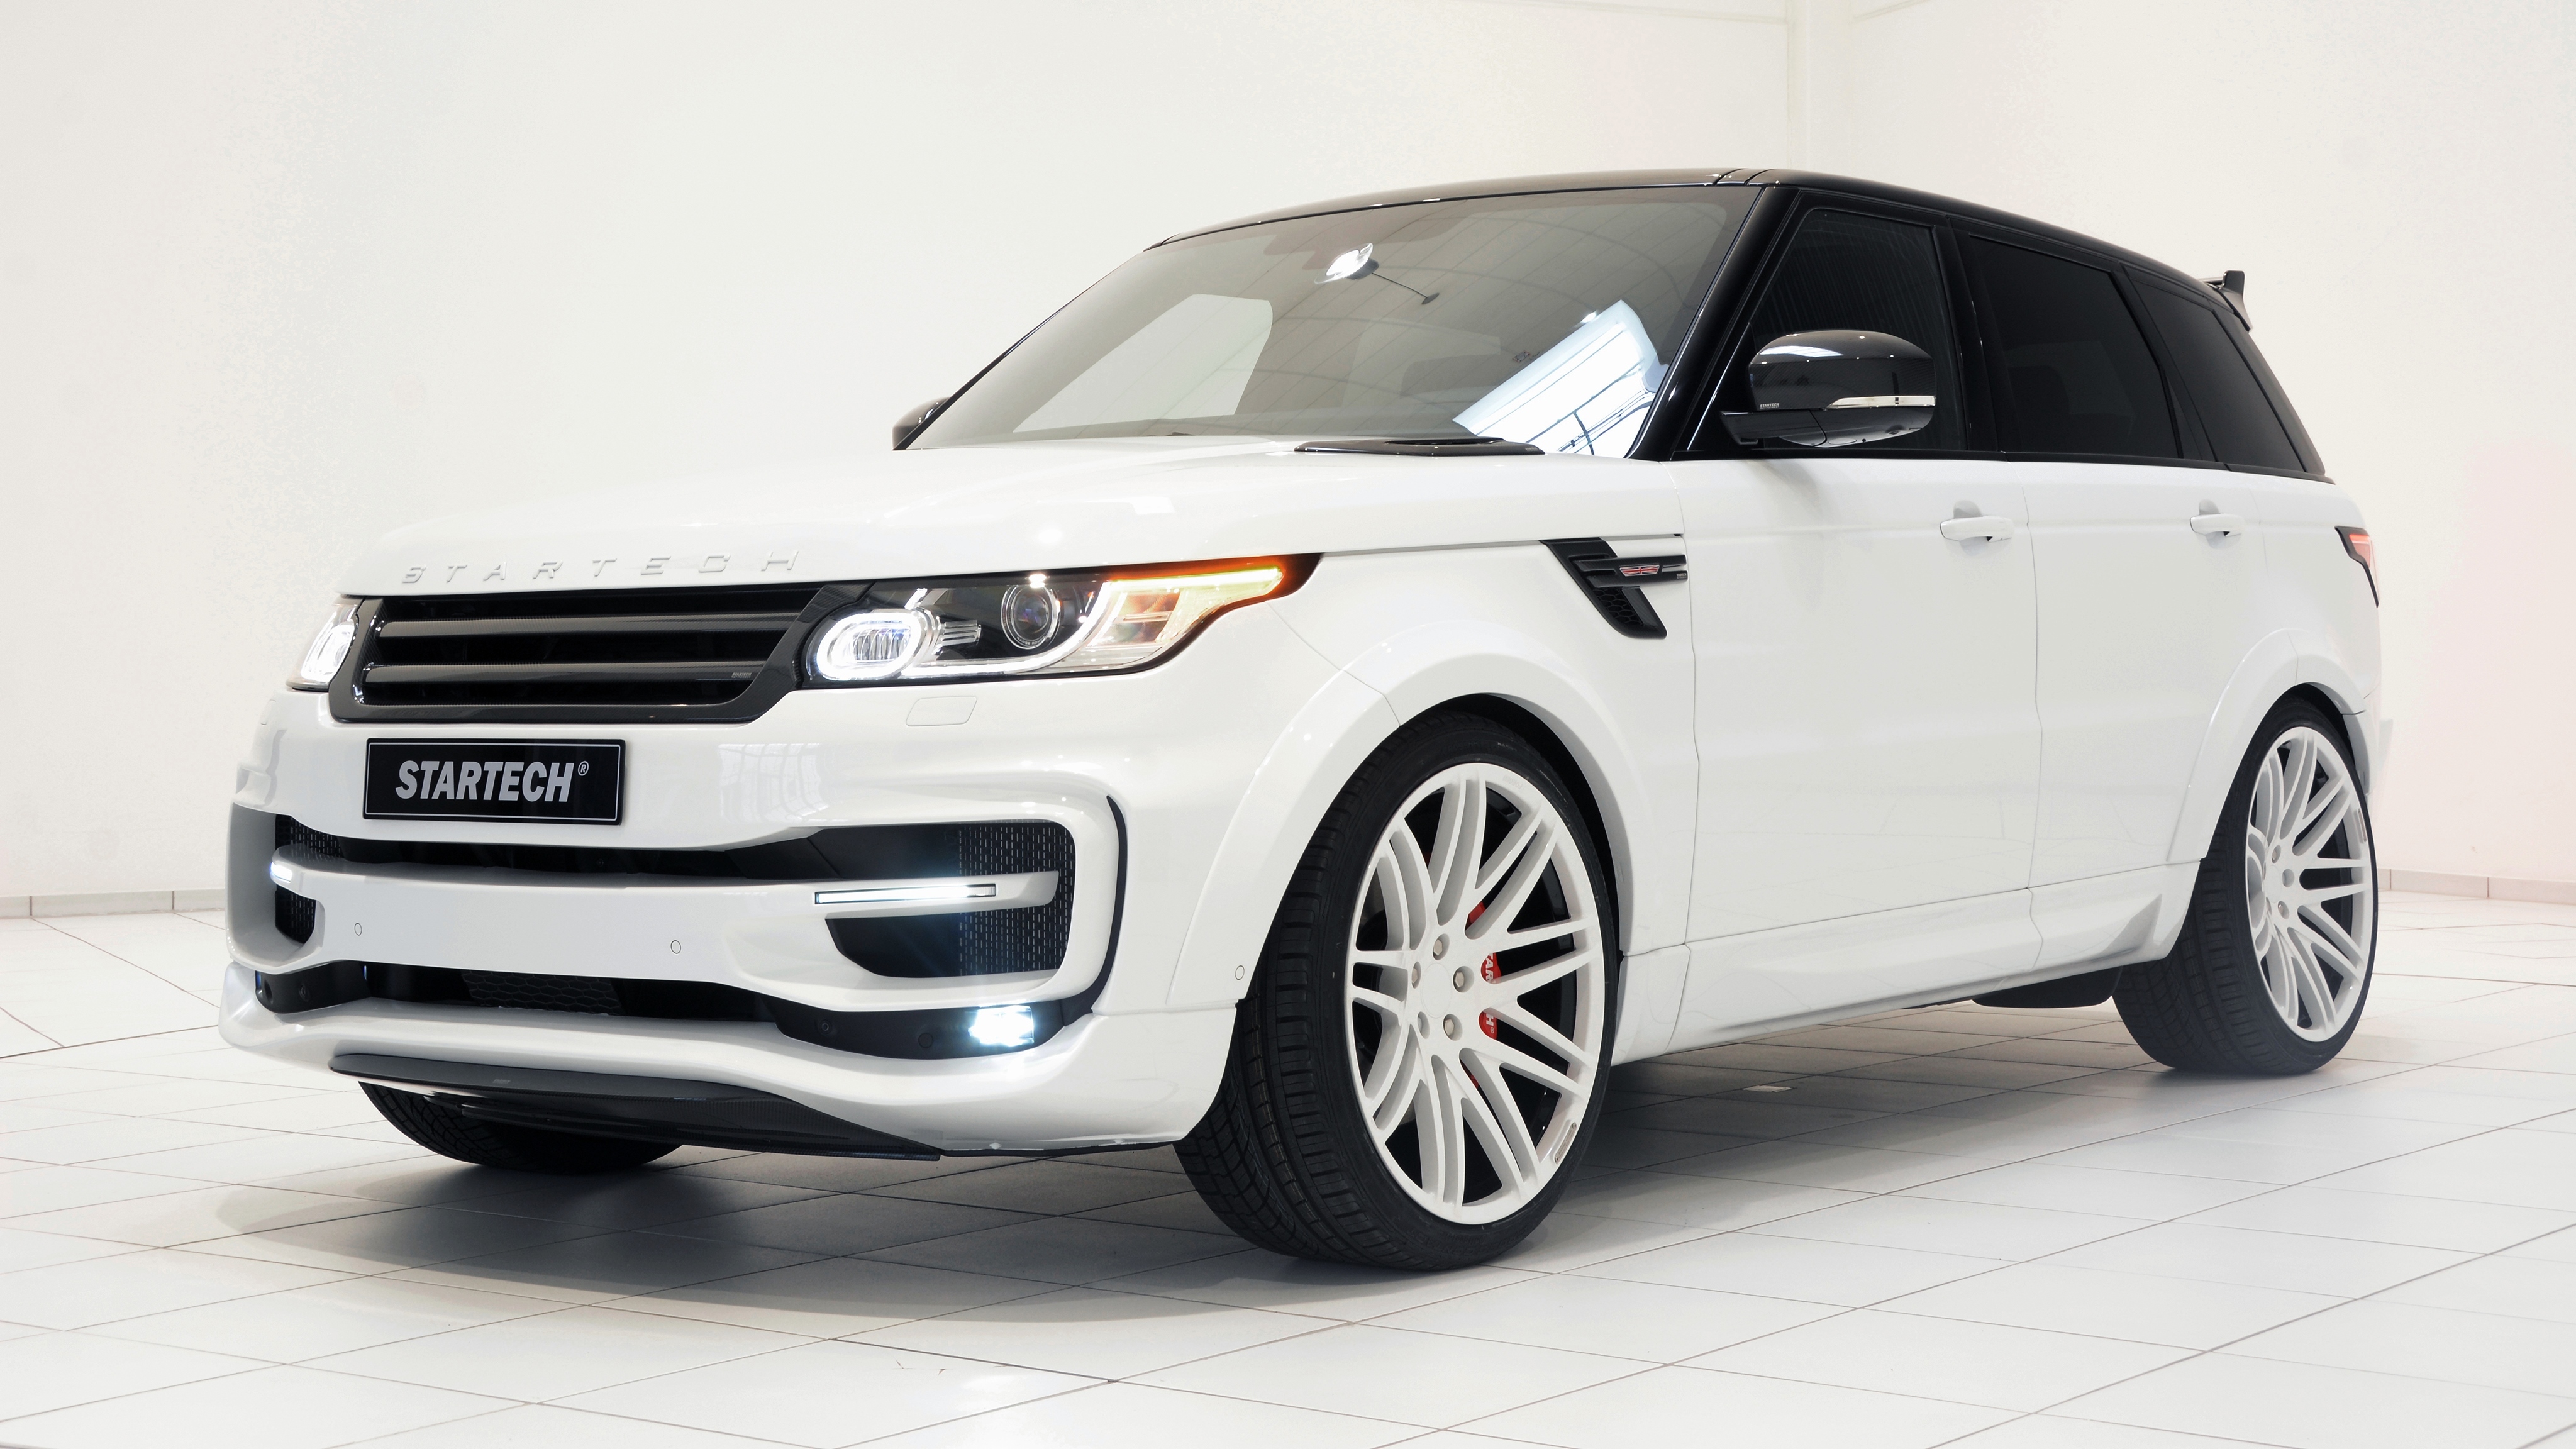 2014, range rover, cars, white, side view, startech